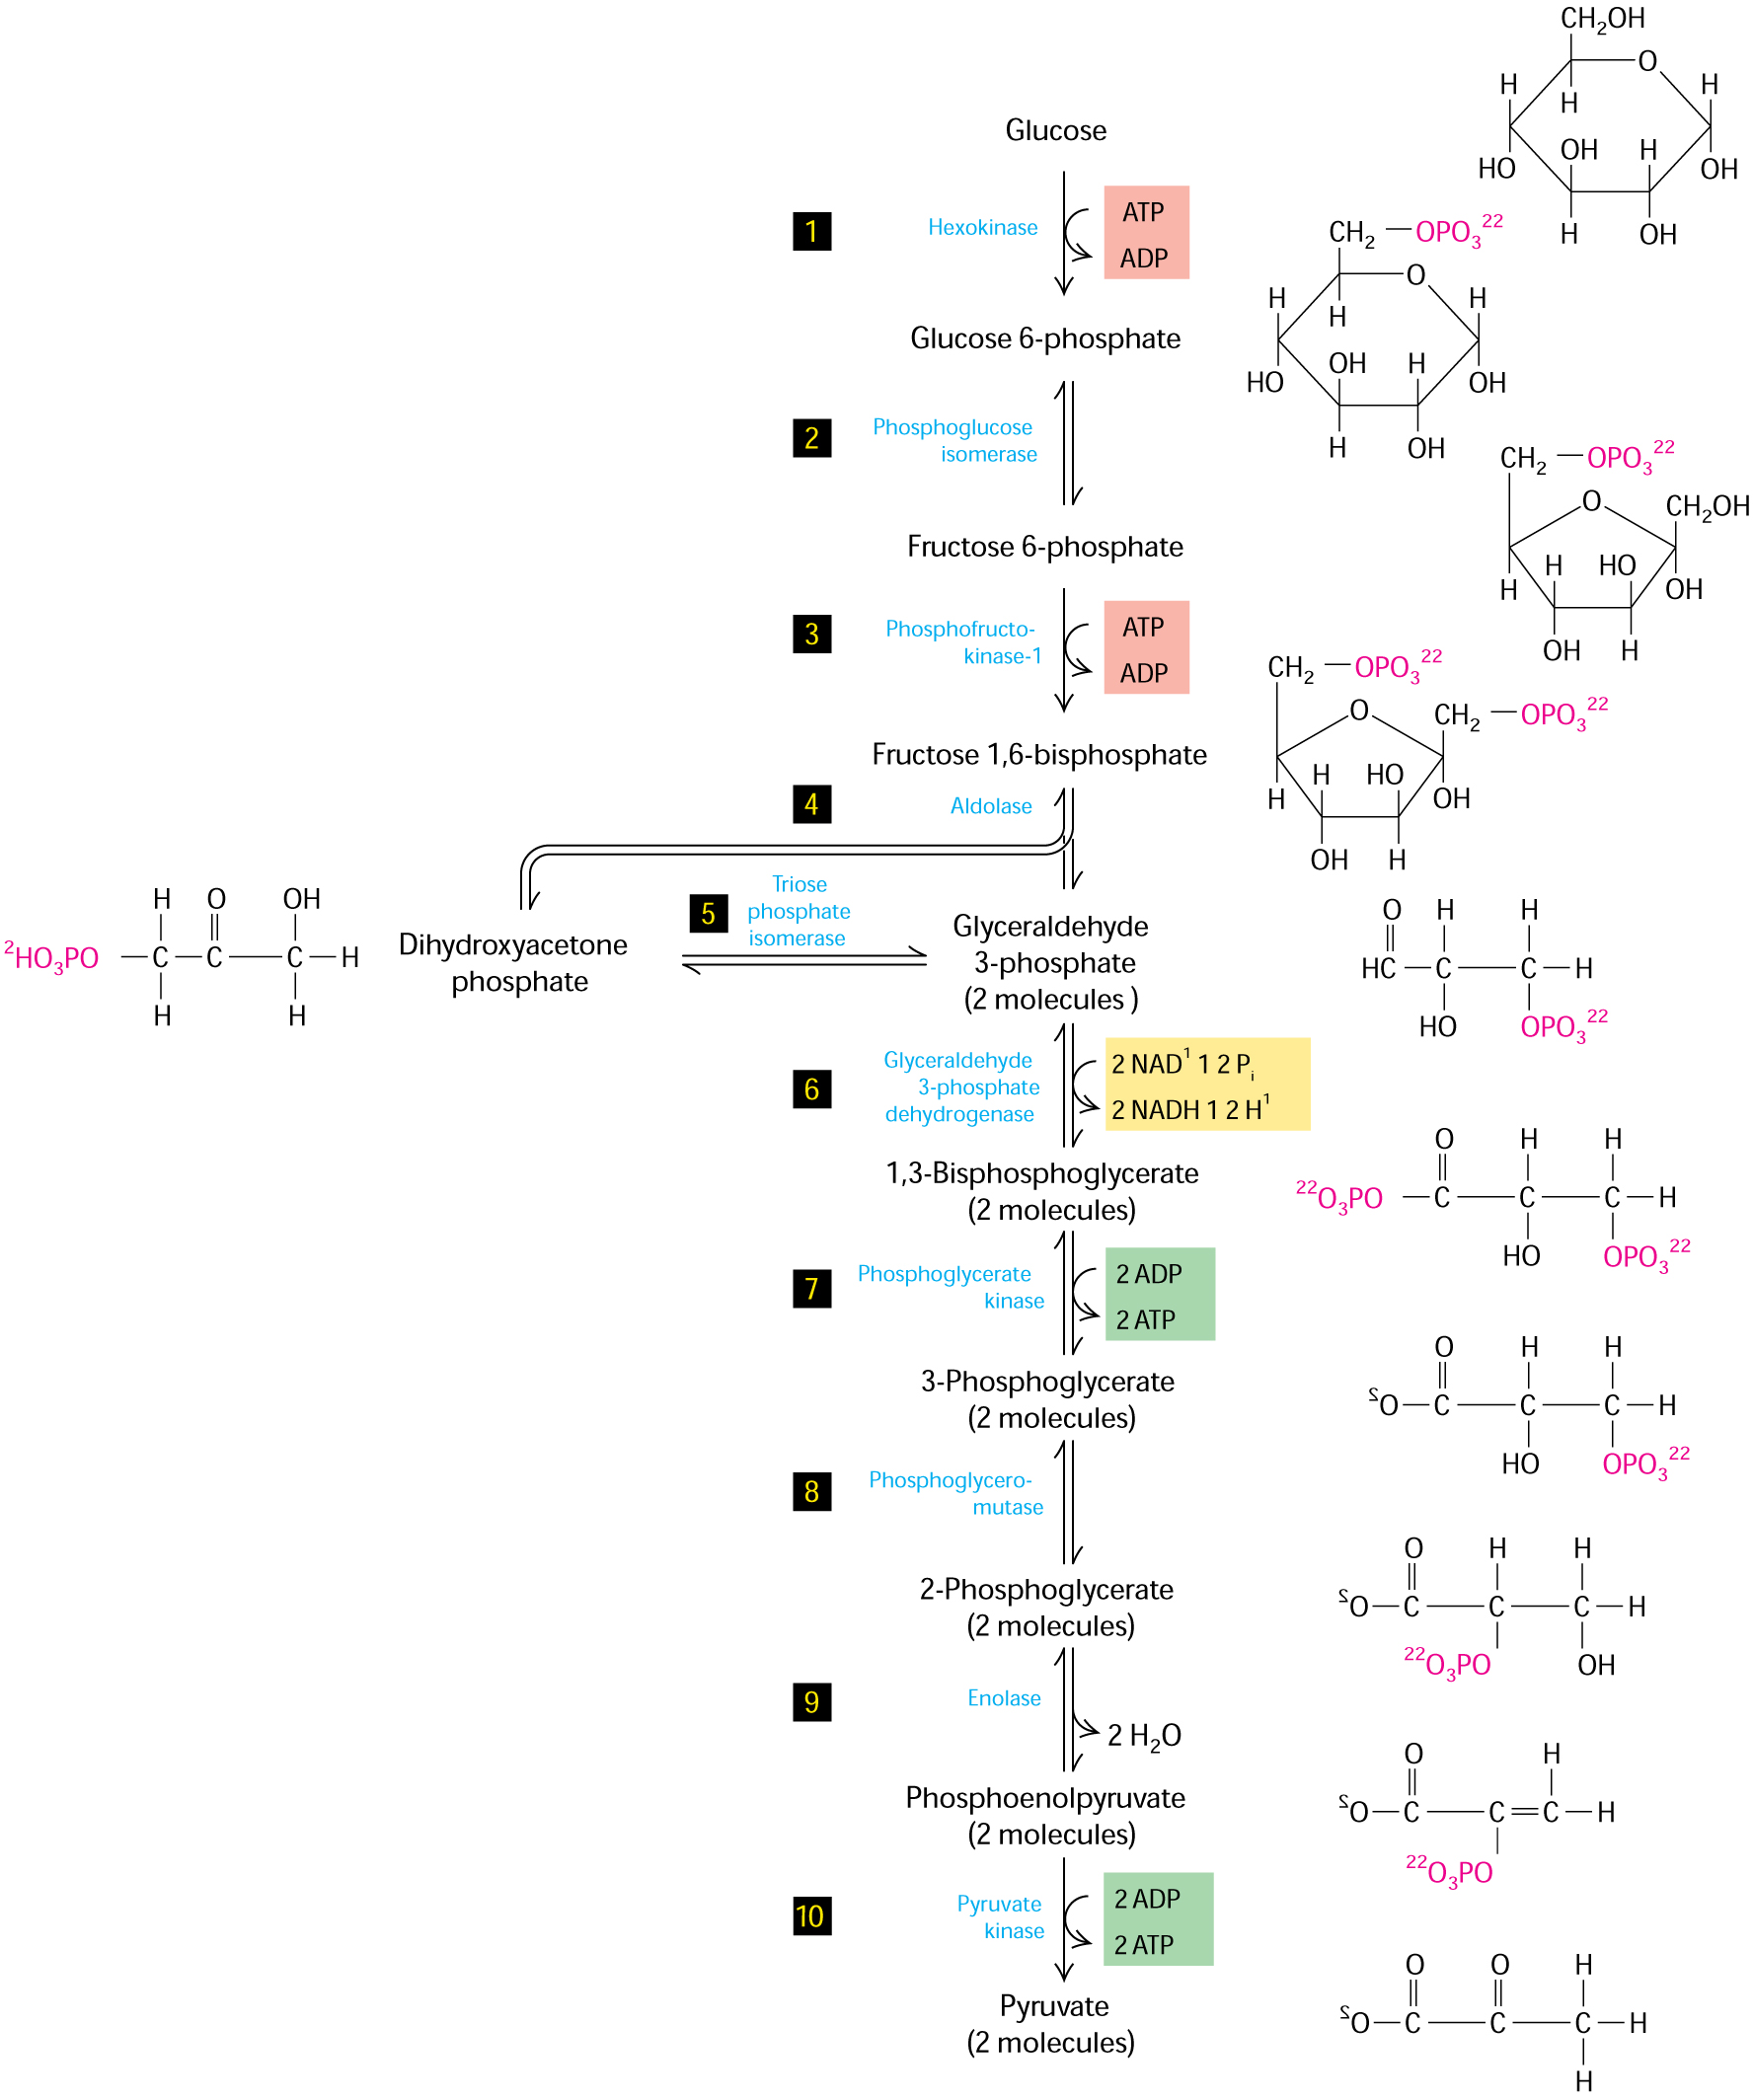 Figure 12-3. The glycolytic pathway. A series of 10 reactions degrades glucose to pyruvate. Two reactions consume ATP, forming ADP and phosphorylated sugars (red); two generate ATP from ADP by substrate-level phosphorylation (green); and one yields NADH by reduction of NAD+ (yellow).